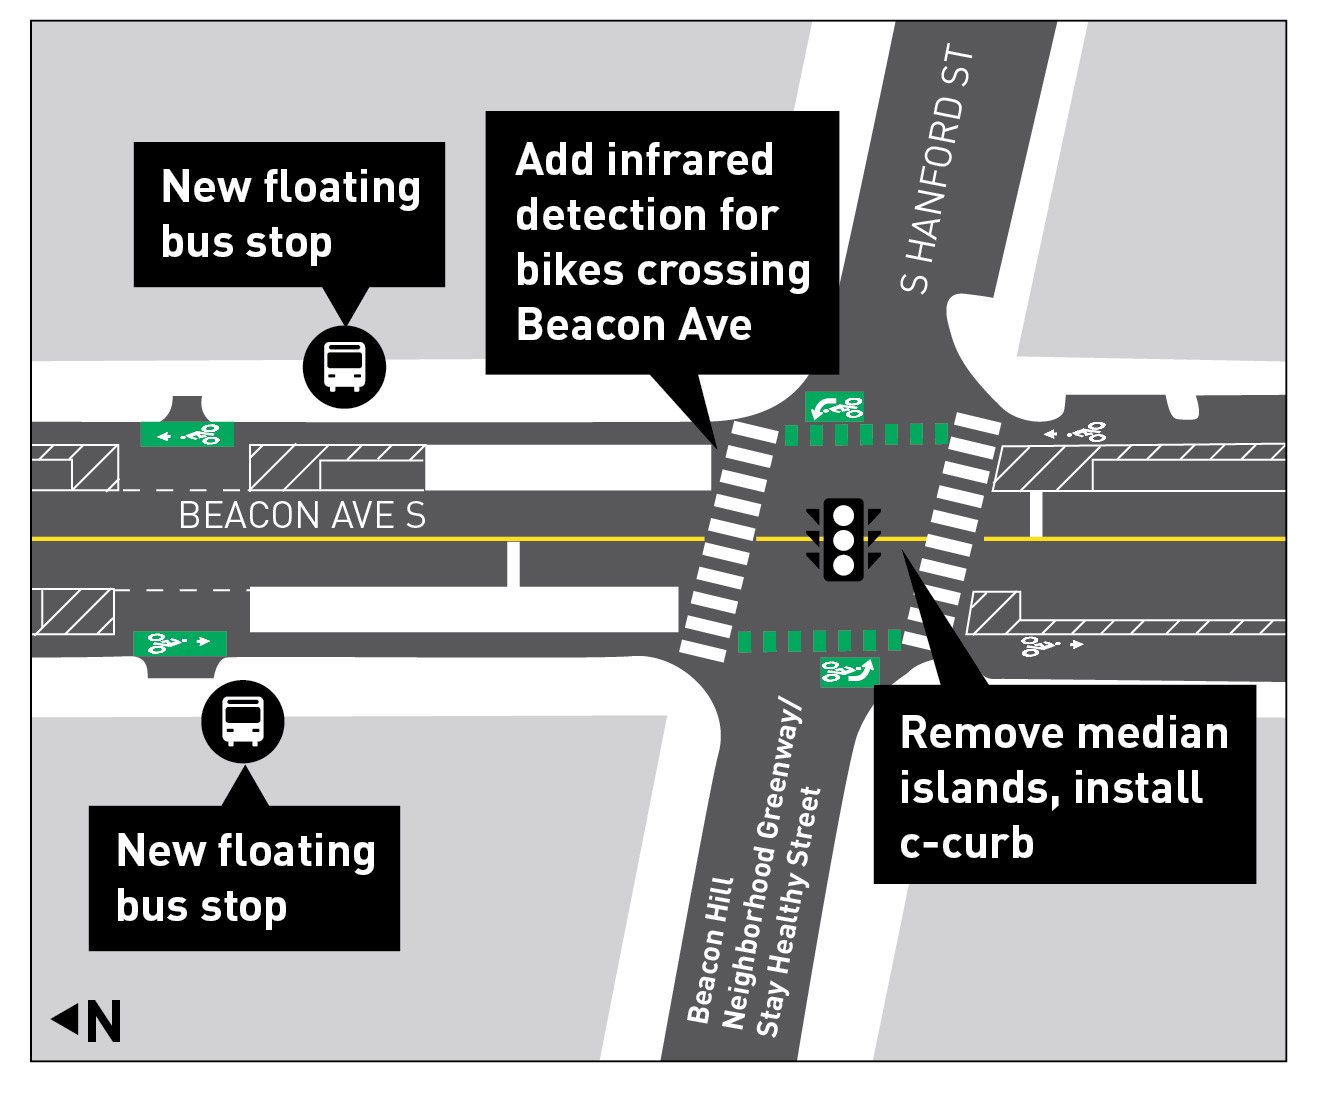 A graphic map showing the locations of new Marked crosswalks, curbside push buttons for crossings, ADA Ramps, and concrete curb bulbs with Healthy Street signage at the intersection of Beacon Ave. S and S Hanford St.